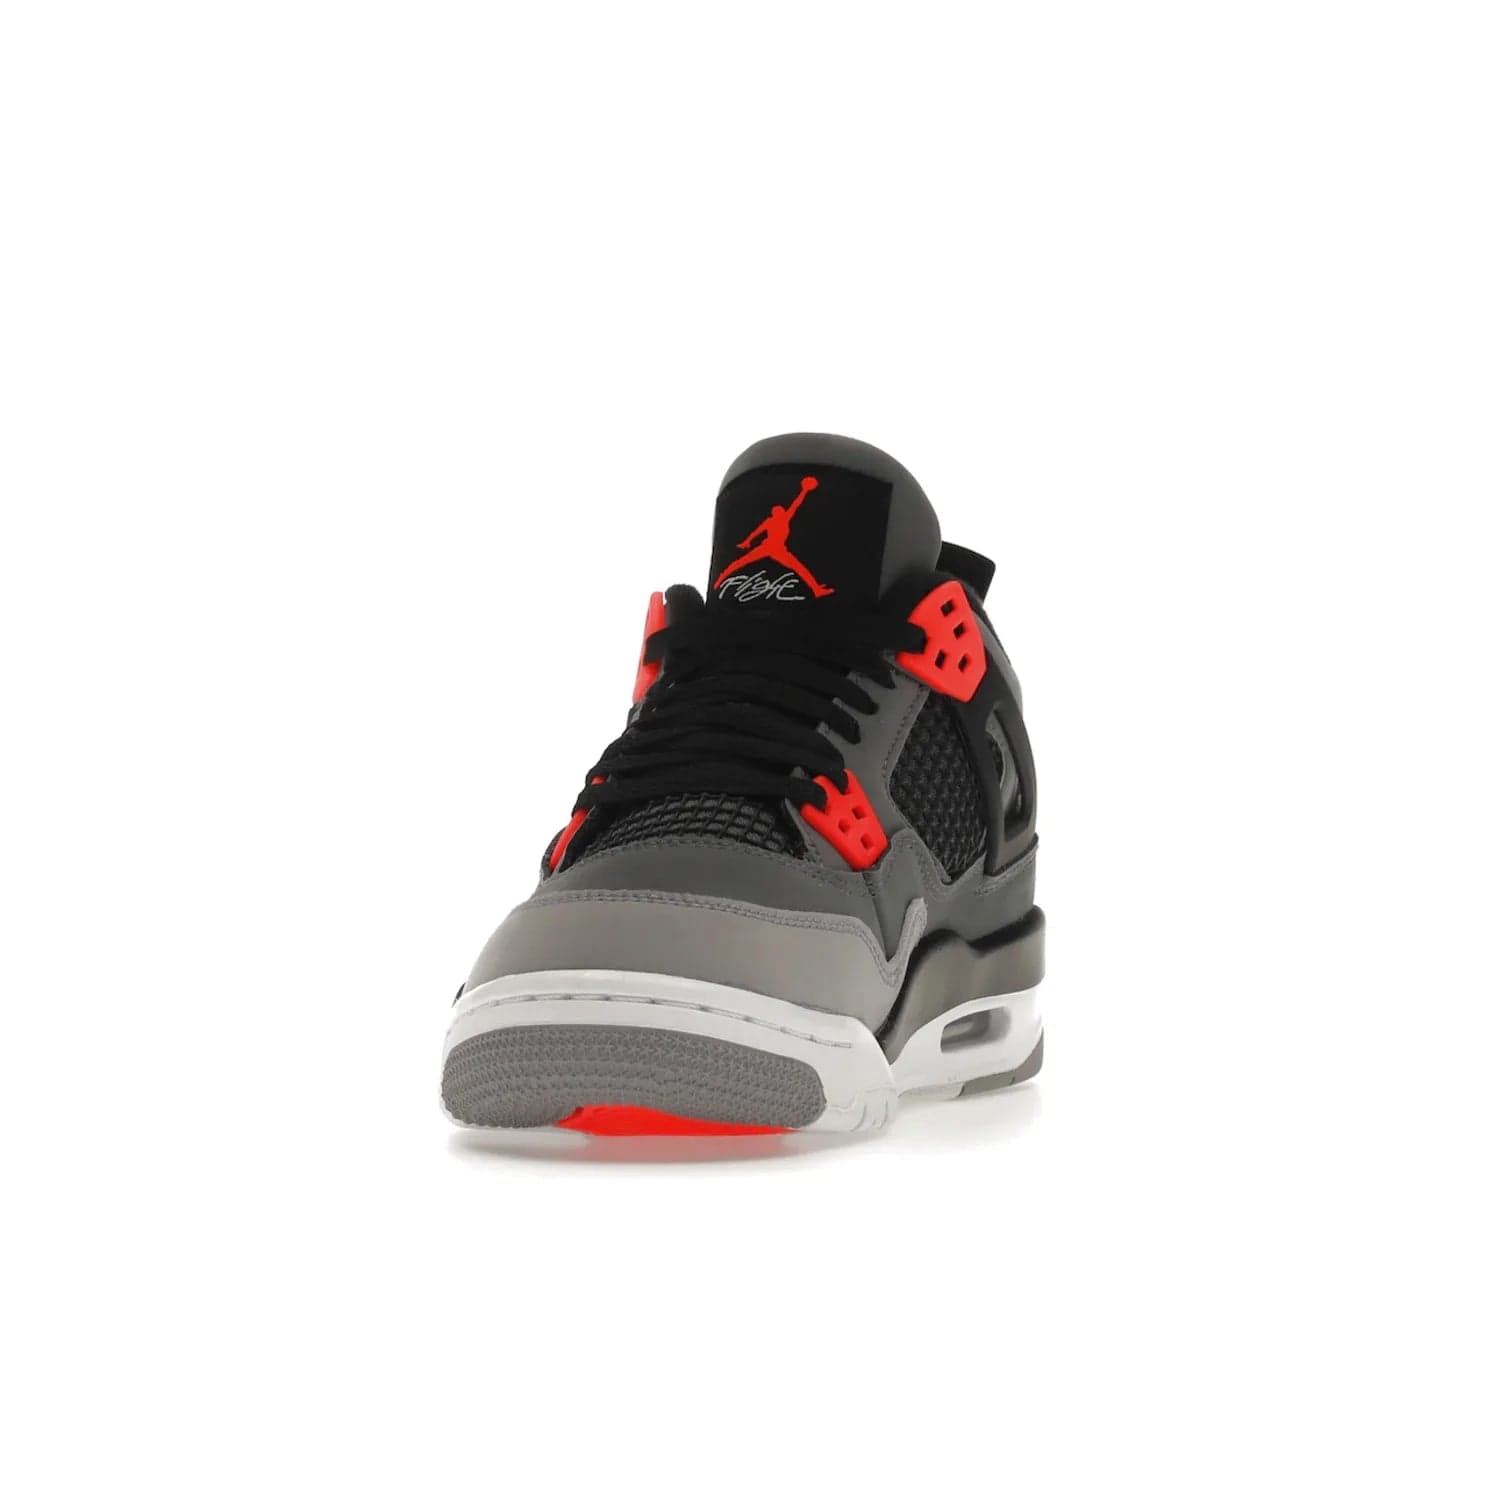 Jordan 4 Retro Infrared (GS) - Image 12 - Only at www.BallersClubKickz.com - Shop the Air Jordan 4 Retro Infrared (GS) for a classic silhouette with subtle yet bold features. Dark grey nubuck upper with lighter forefoot overlay, black accents, Infrared molded eyelets & woven tongue tag. Available June 2022.